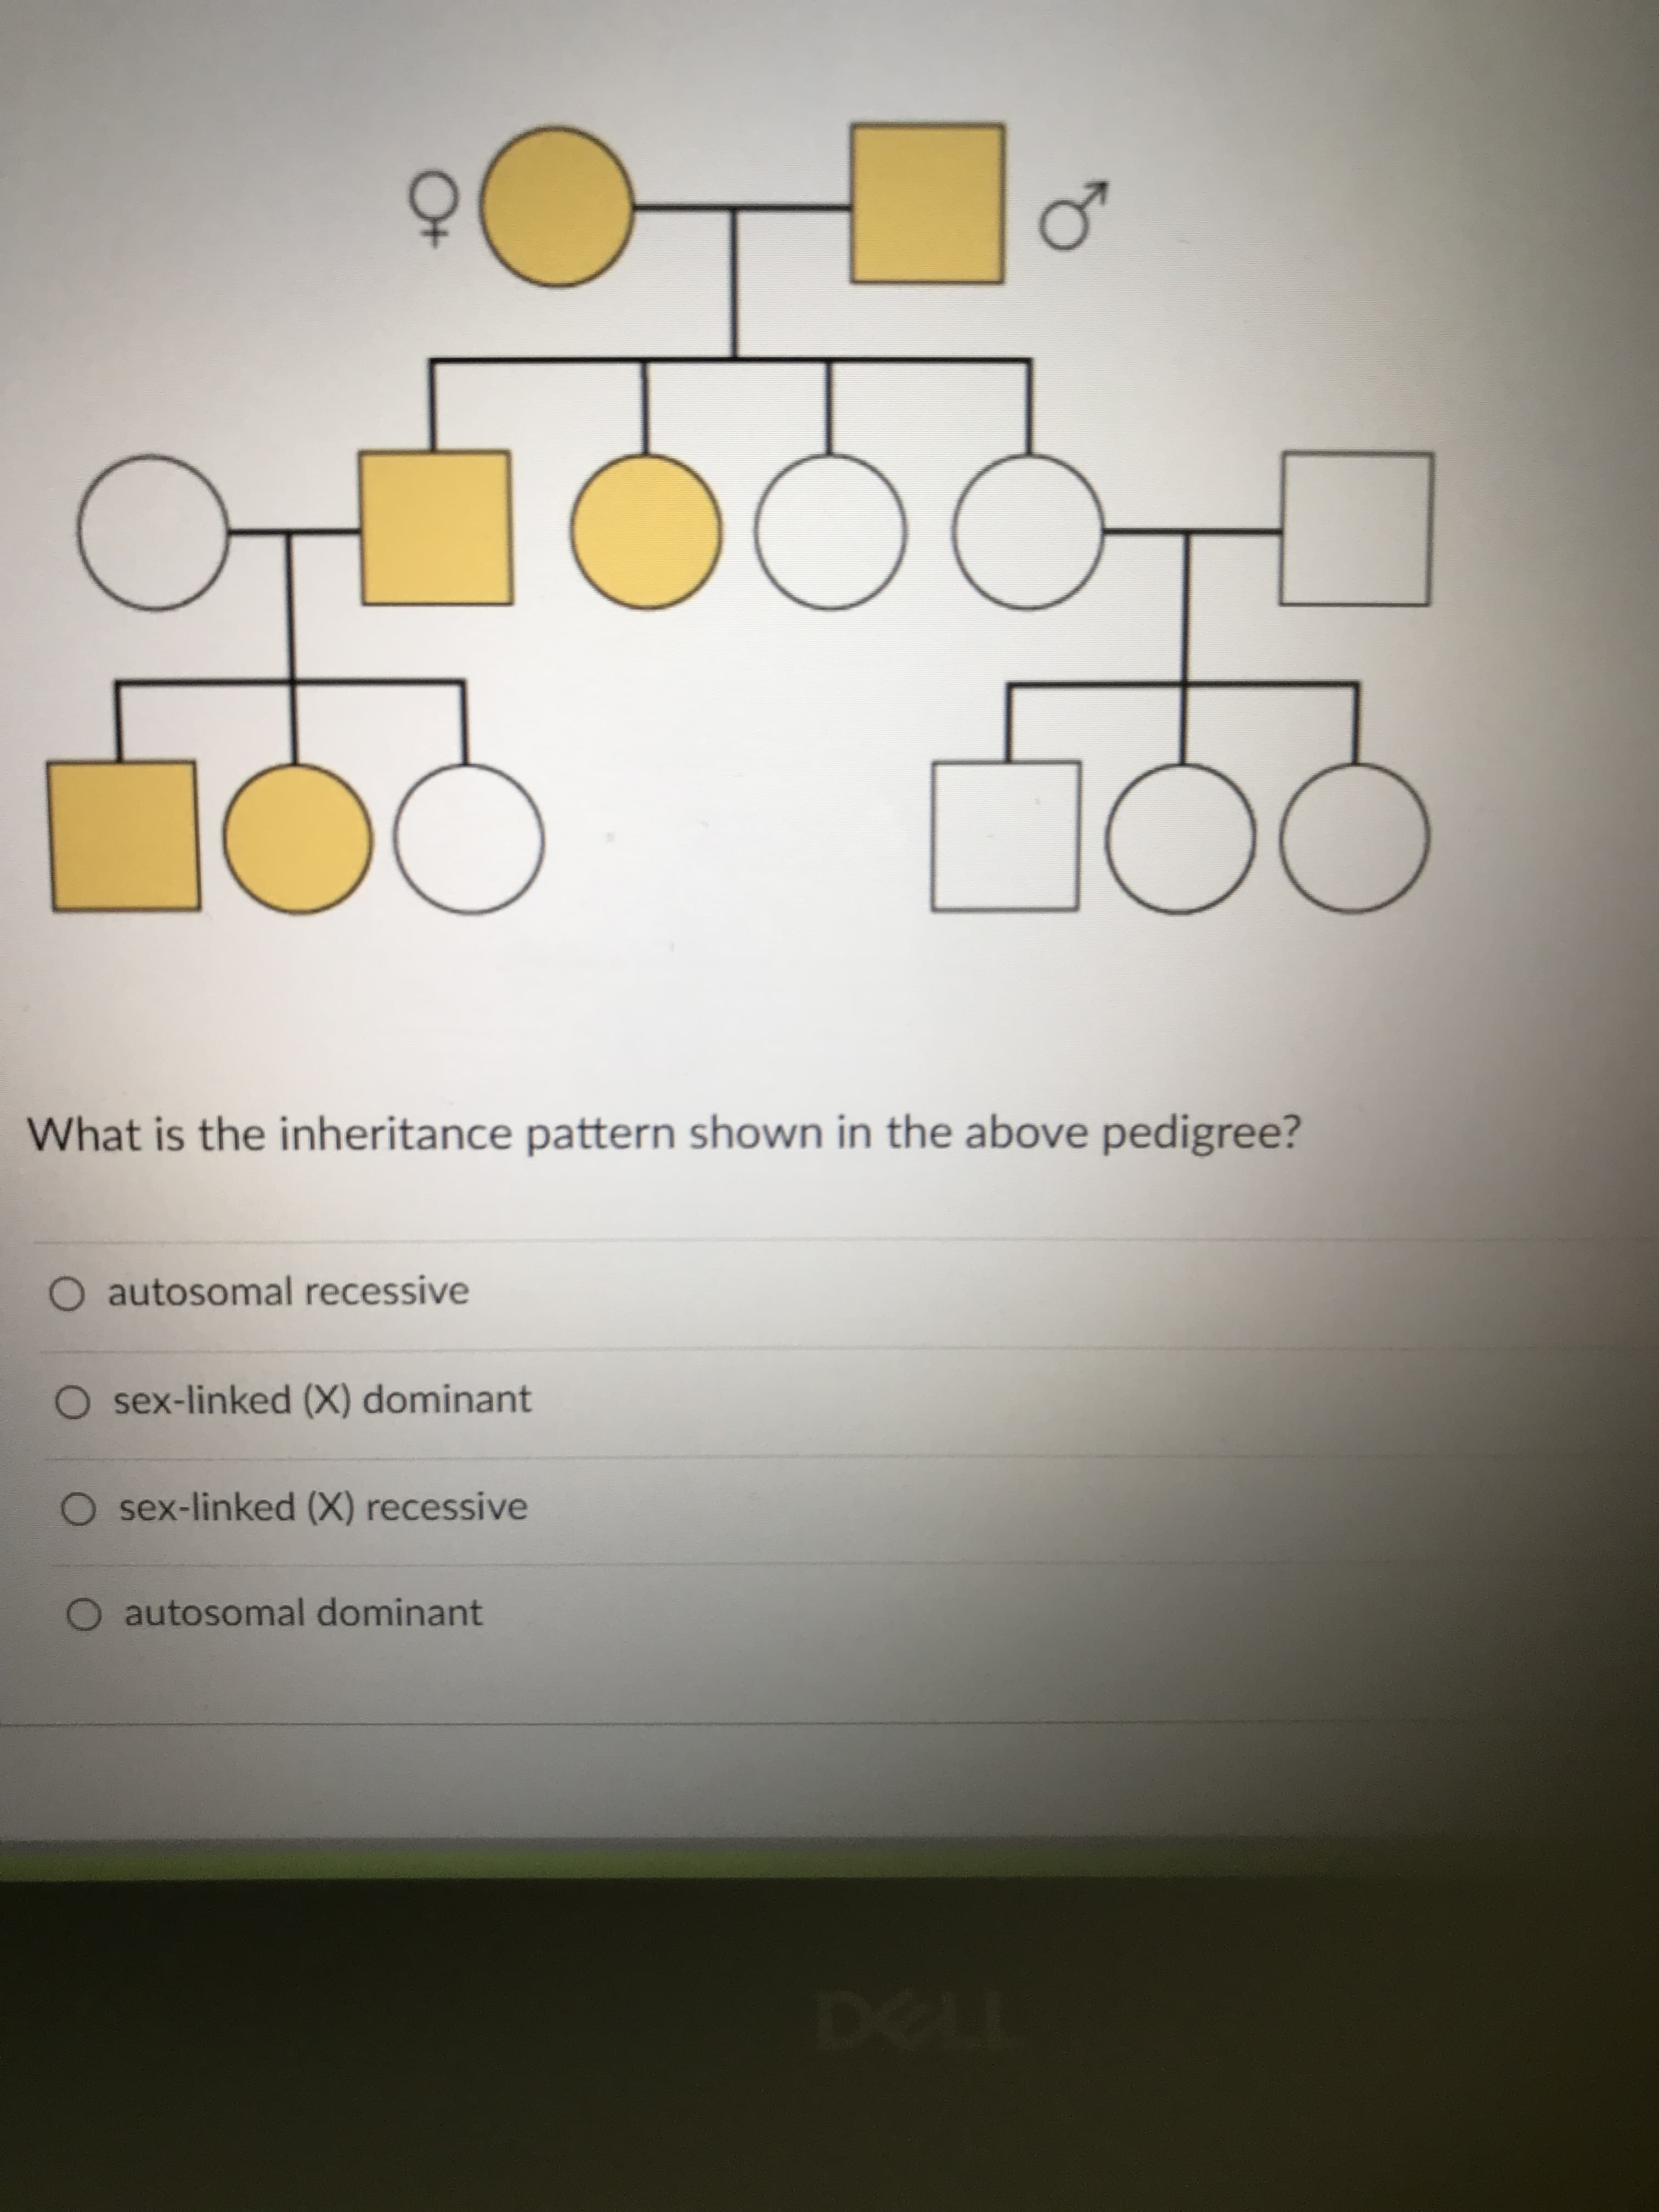 What is the inheritance pattern shown in the above pedigree?
O autosomal recessive
O sex-linked (X) dominant
O sex-linked (X) recessive
O autosomal dominant
